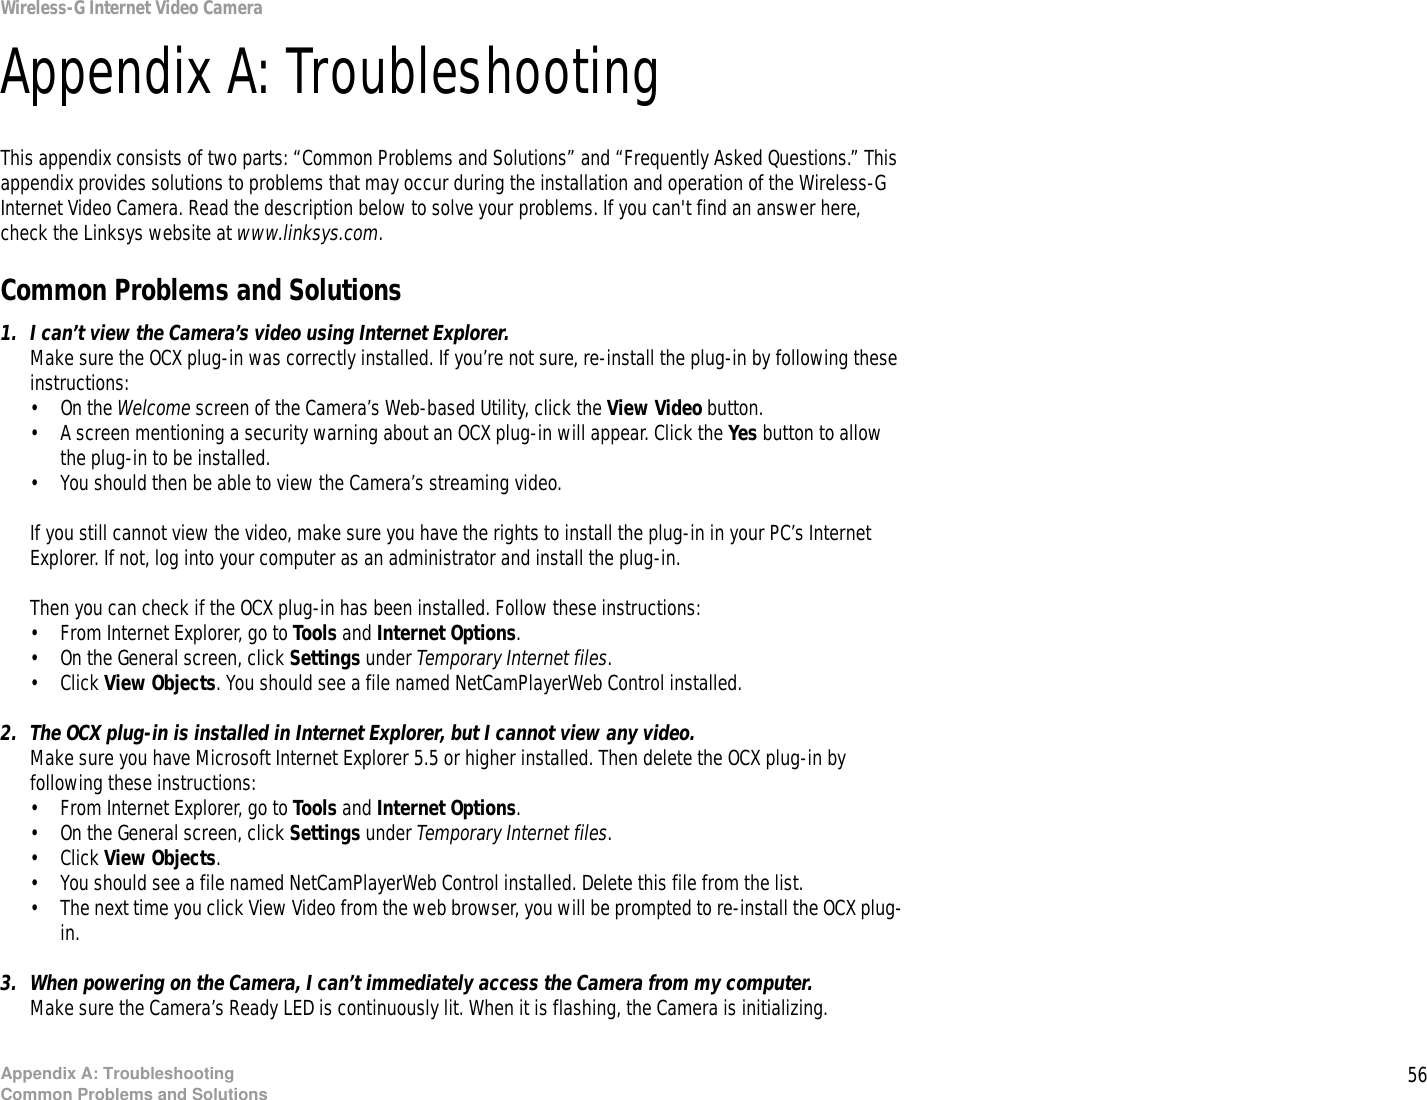 56Appendix A: TroubleshootingCommon Problems and SolutionsWireless-G Internet Video CameraAppendix A: TroubleshootingThis appendix consists of two parts: “Common Problems and Solutions” and “Frequently Asked Questions.” This appendix provides solutions to problems that may occur during the installation and operation of the Wireless-G Internet Video Camera. Read the description below to solve your problems. If you can&apos;t find an answer here, check the Linksys website at www.linksys.com.Common Problems and Solutions1. I can’t view the Camera’s video using Internet Explorer.Make sure the OCX plug-in was correctly installed. If you’re not sure, re-install the plug-in by following these instructions:• On the Welcome screen of the Camera’s Web-based Utility, click the View Video button.• A screen mentioning a security warning about an OCX plug-in will appear. Click the Yes button to allow the plug-in to be installed.• You should then be able to view the Camera’s streaming video.If you still cannot view the video, make sure you have the rights to install the plug-in in your PC’s Internet Explorer. If not, log into your computer as an administrator and install the plug-in.Then you can check if the OCX plug-in has been installed. Follow these instructions:• From Internet Explorer, go to Tools and Internet Options.• On the General screen, click Settings under Temporary Internet files.• Click View Objects. You should see a file named NetCamPlayerWeb Control installed.2. The OCX plug-in is installed in Internet Explorer, but I cannot view any video.Make sure you have Microsoft Internet Explorer 5.5 or higher installed. Then delete the OCX plug-in by following these instructions:• From Internet Explorer, go to Tools and Internet Options.• On the General screen, click Settings under Temporary Internet files.• Click View Objects. • You should see a file named NetCamPlayerWeb Control installed. Delete this file from the list.• The next time you click View Video from the web browser, you will be prompted to re-install the OCX plug-in.3. When powering on the Camera, I can’t immediately access the Camera from my computer.Make sure the Camera’s Ready LED is continuously lit. When it is flashing, the Camera is initializing.